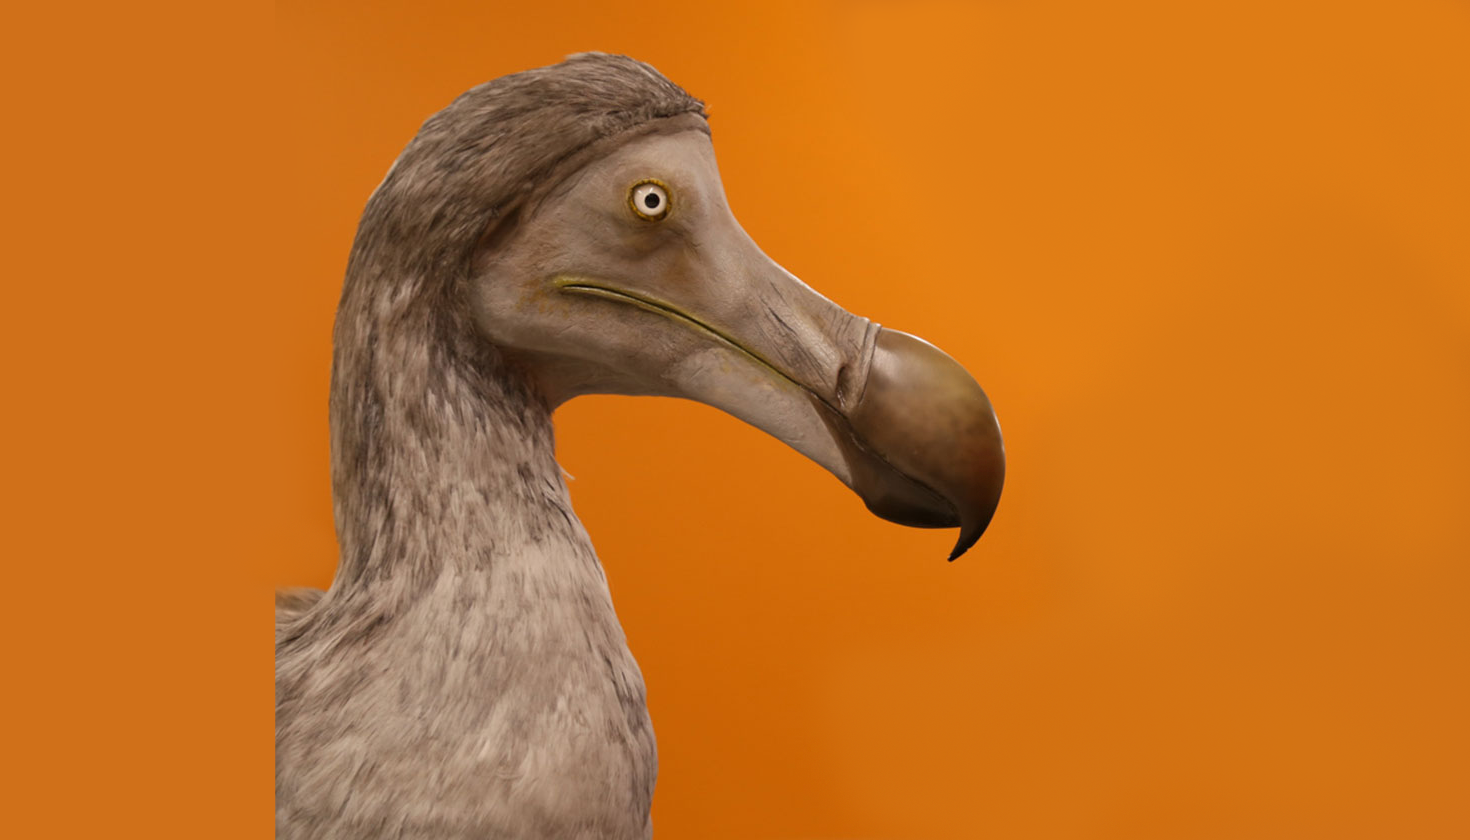 Facts about the dodo